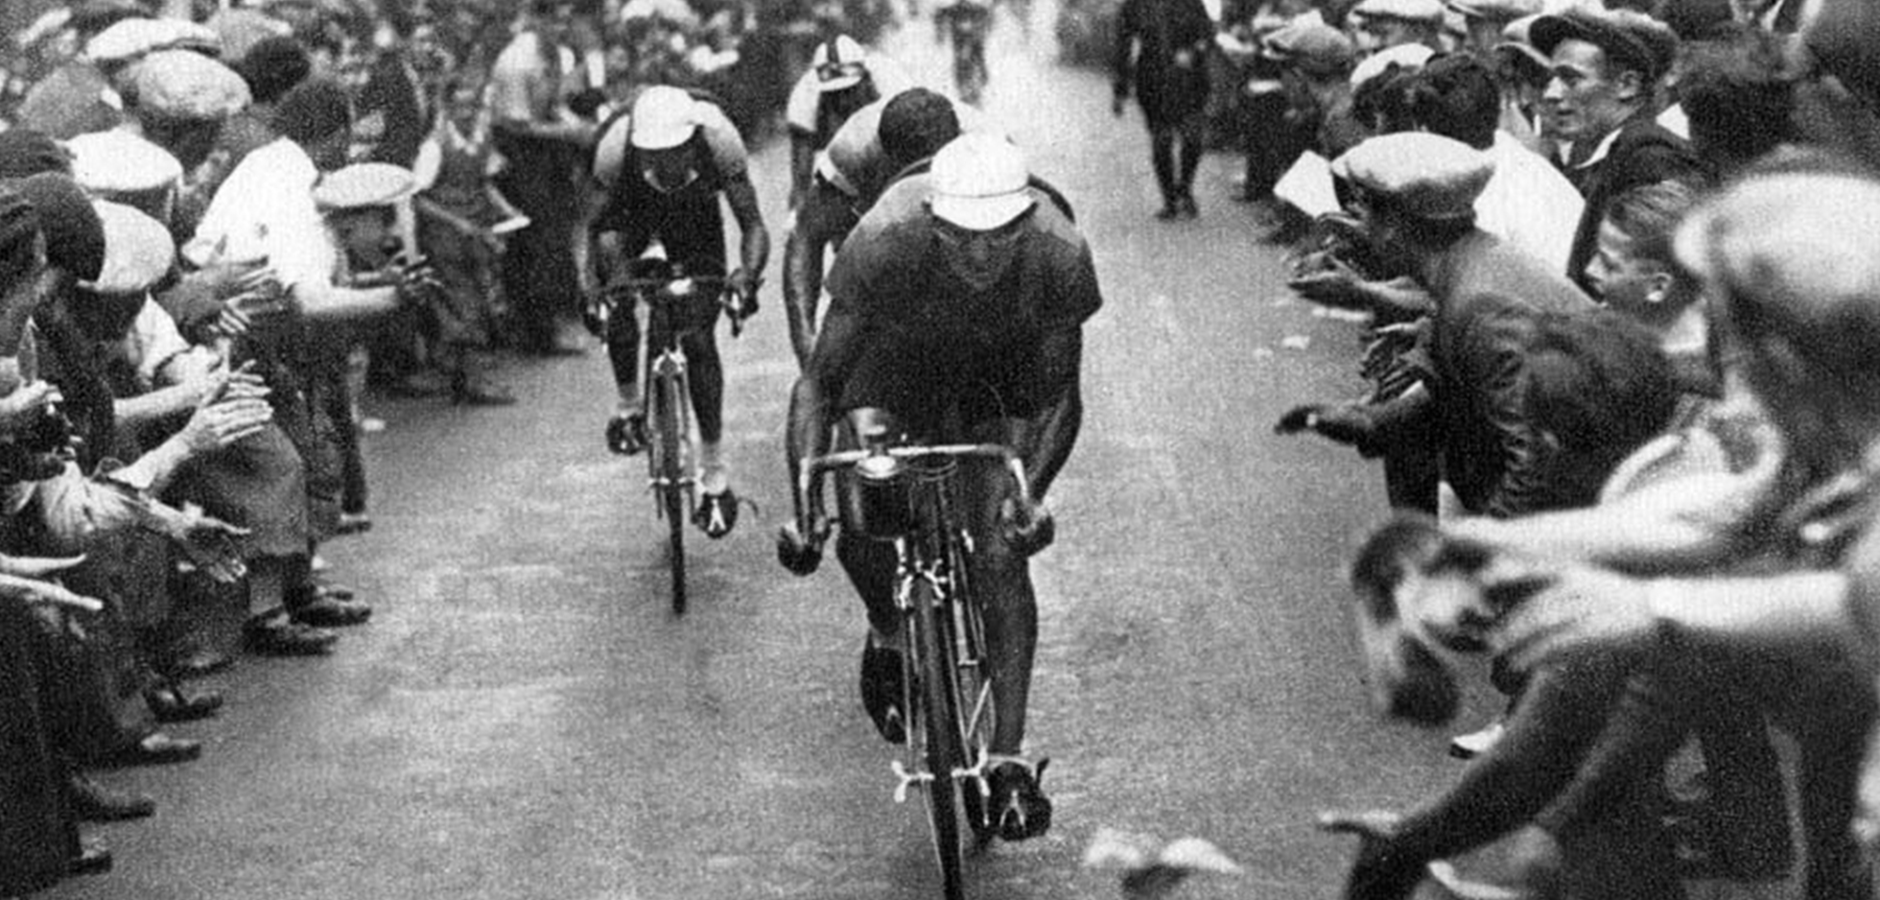 Man cycling on the Tour de France, Black and White Image